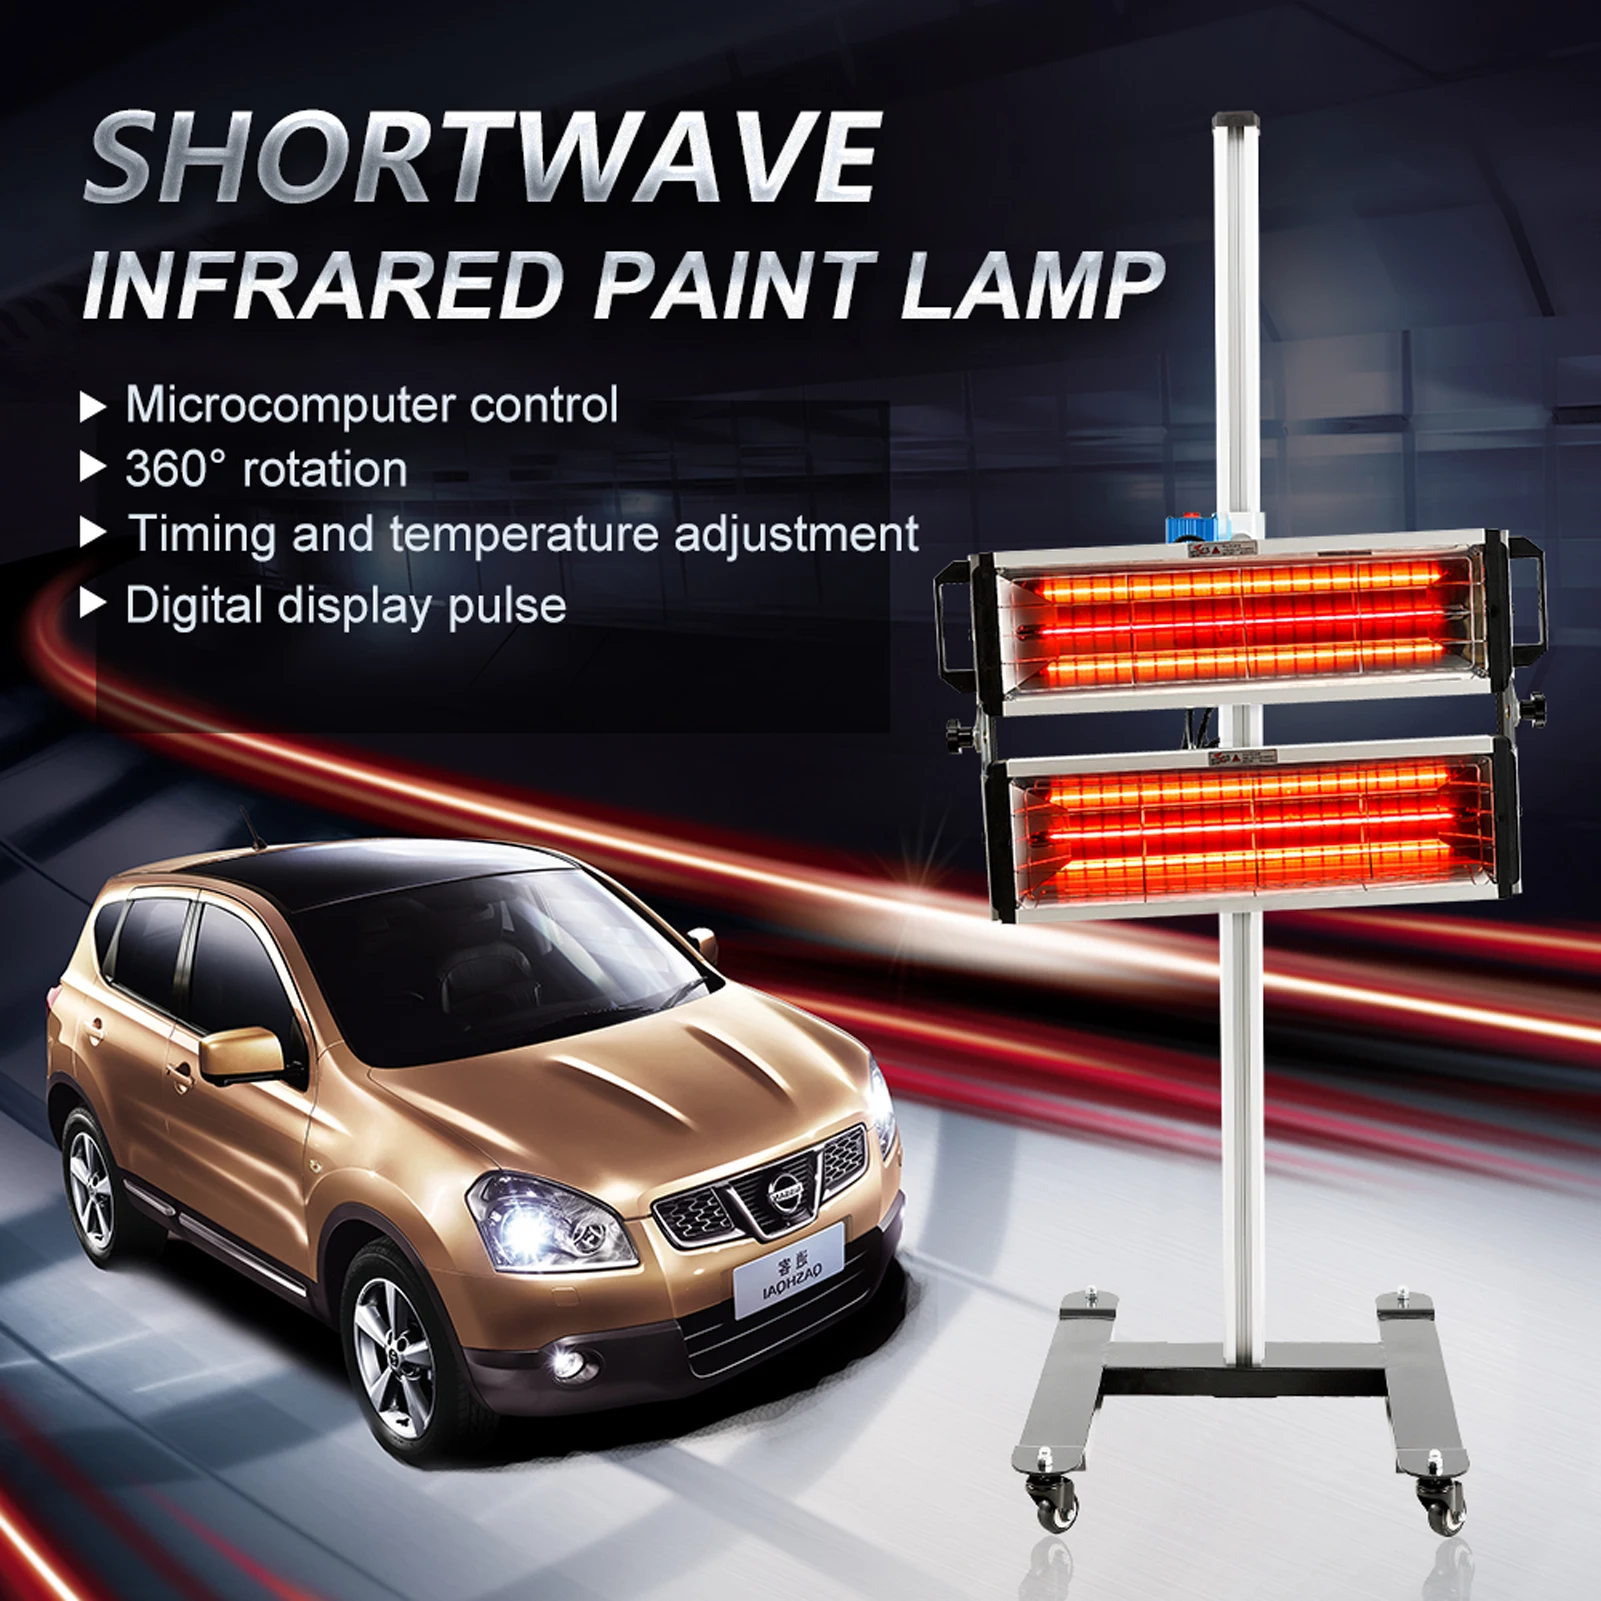 

Infrared Paint Curing Lamp 2000W Short Wave Infrared Heater Paint Booth Car Bodywork Repair Paint Dryer Adjustable Bracket